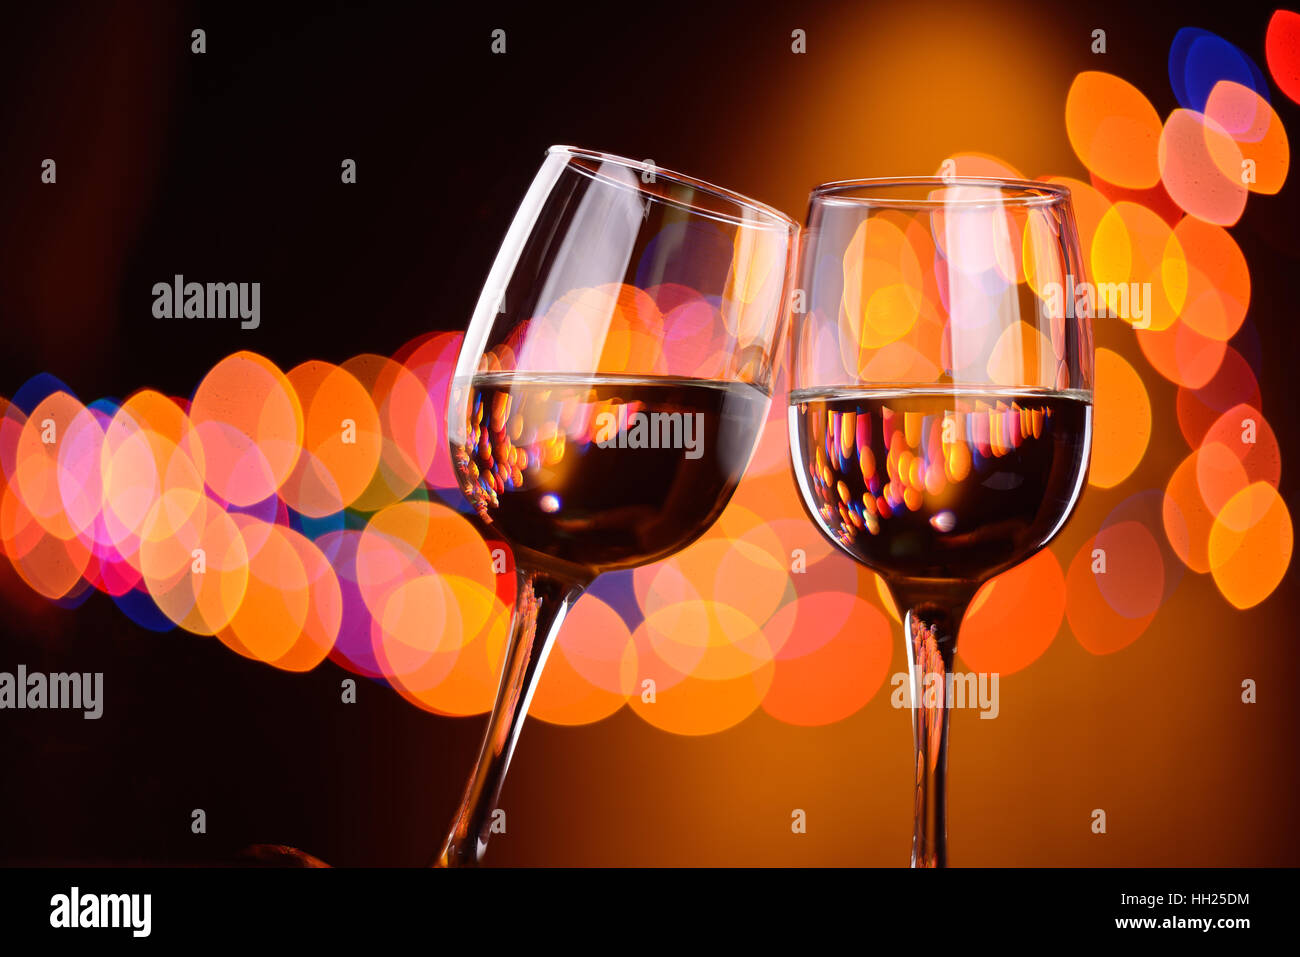 Two wine glasses clink at the party, background with blurred lights Stock Photo